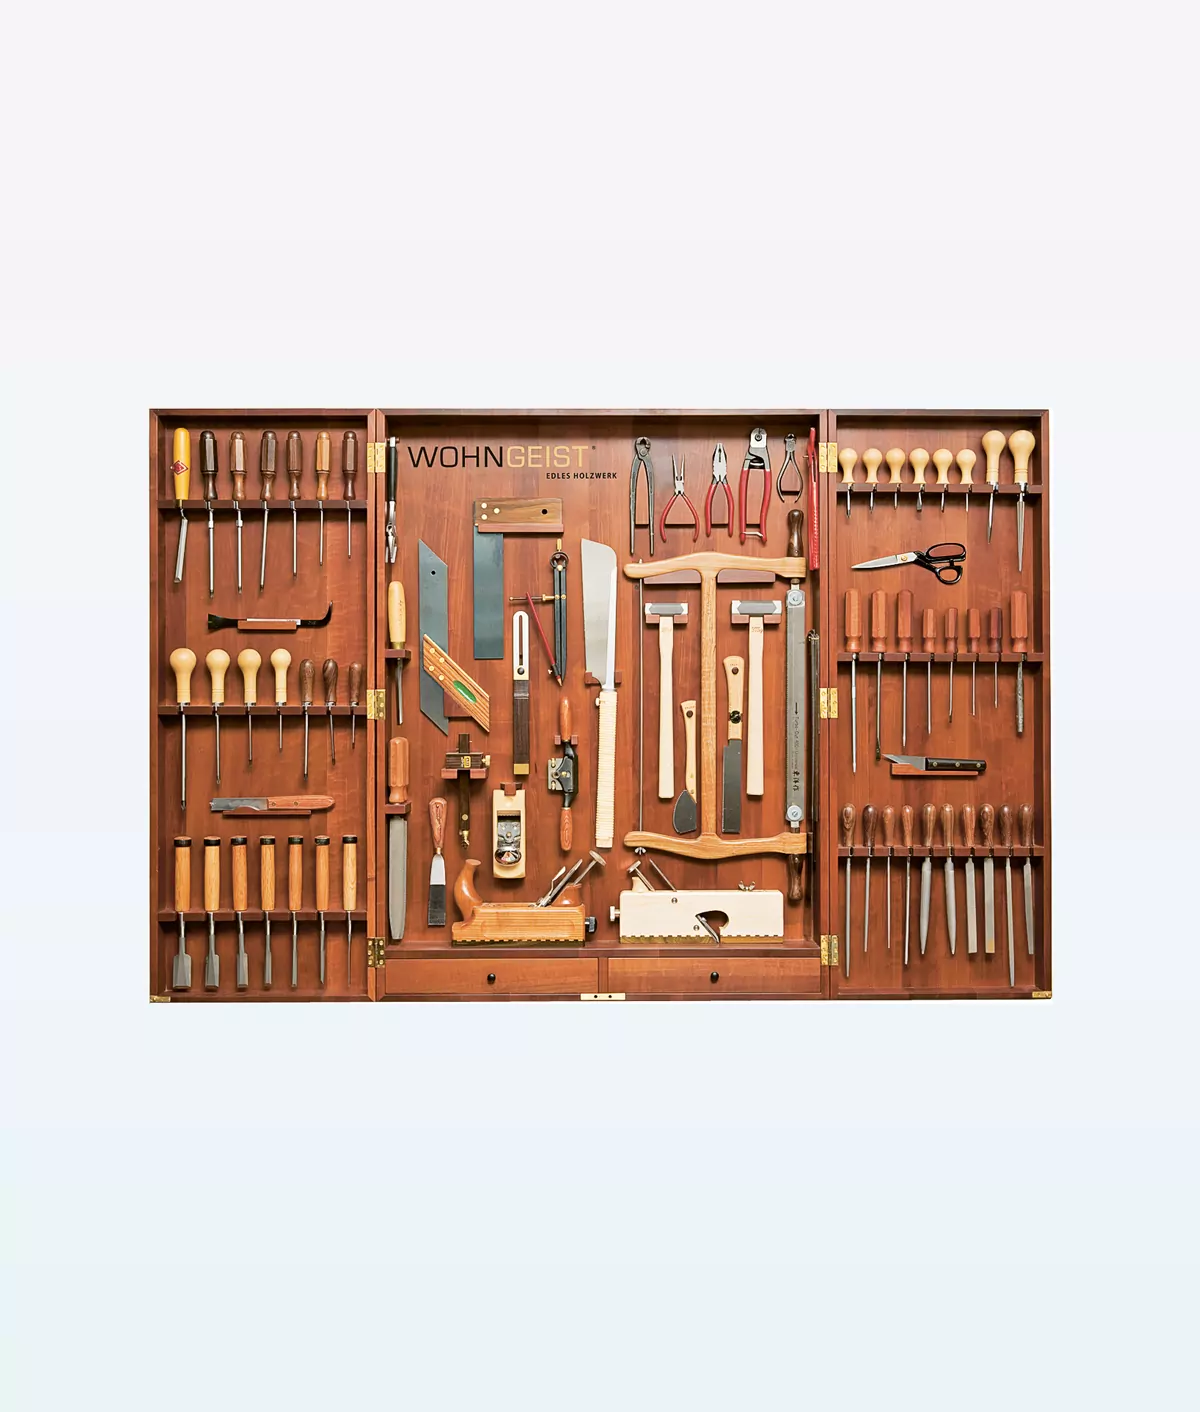 Wood and Luxury Swiss-made Wooden Tool Cabinet